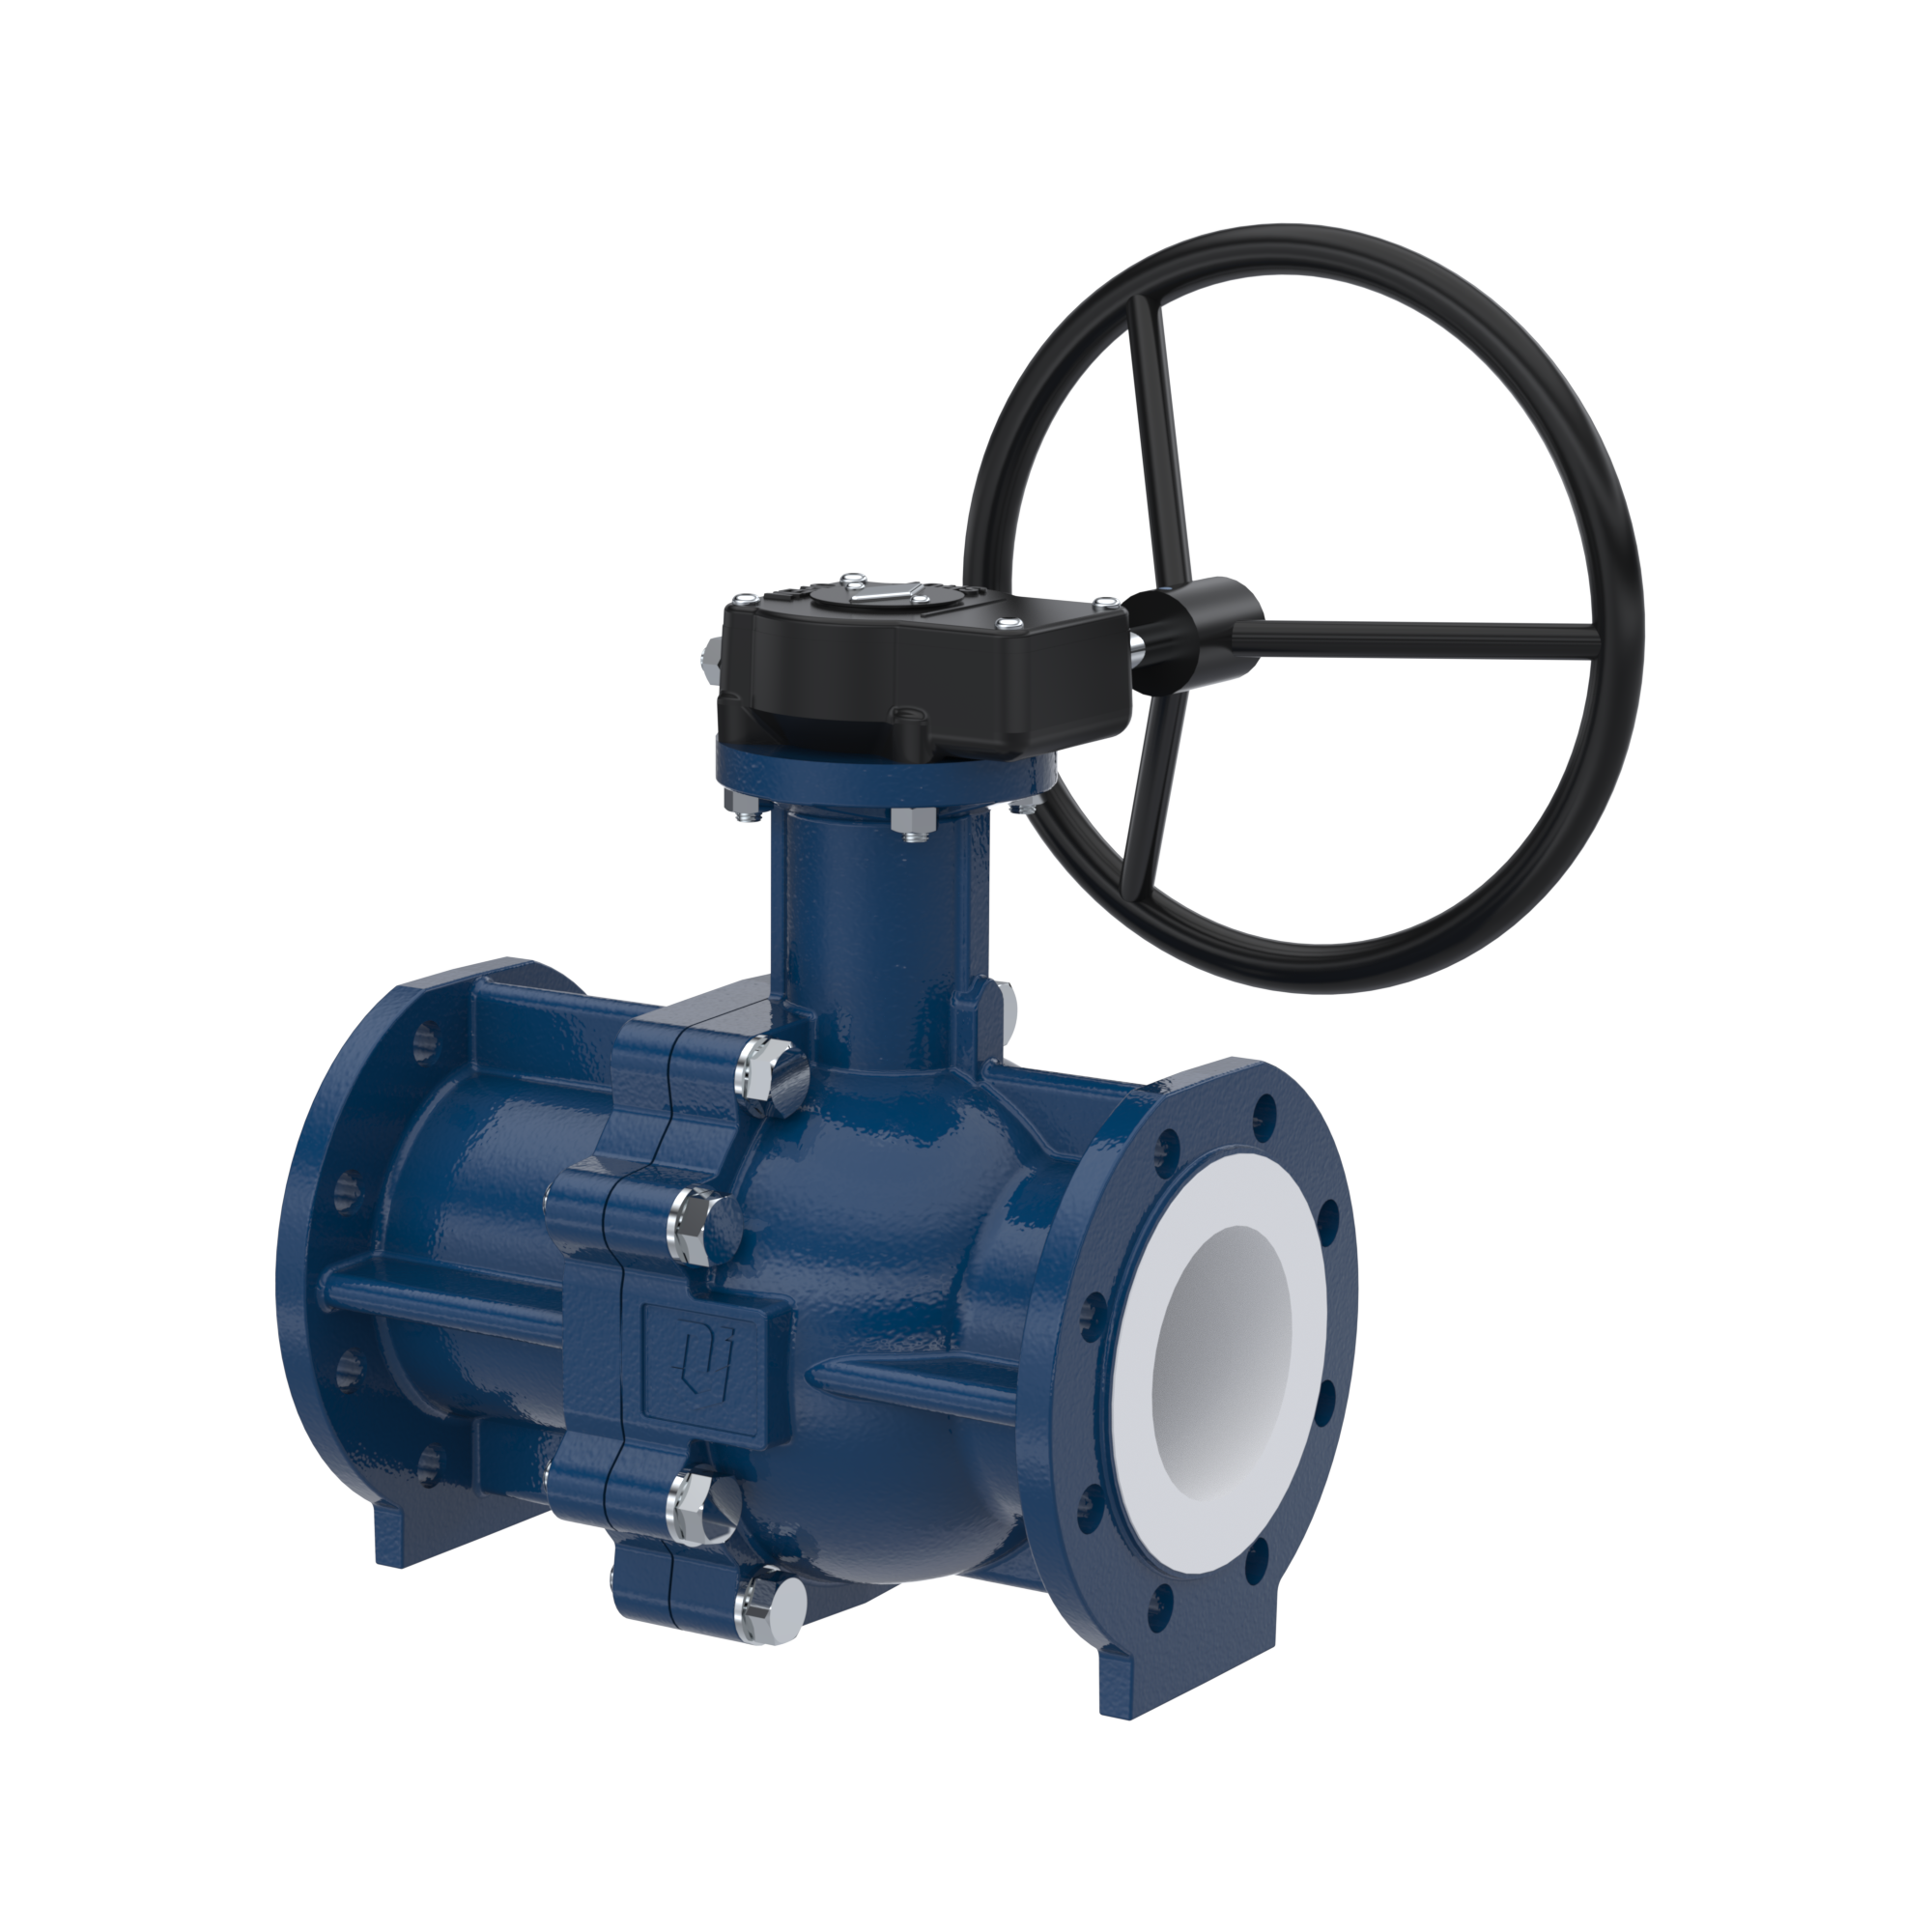 PFA-flange ball valve FK13 DN100 - 4" inch PN10/16 made of spheroidal graphite cast iron with worm gear